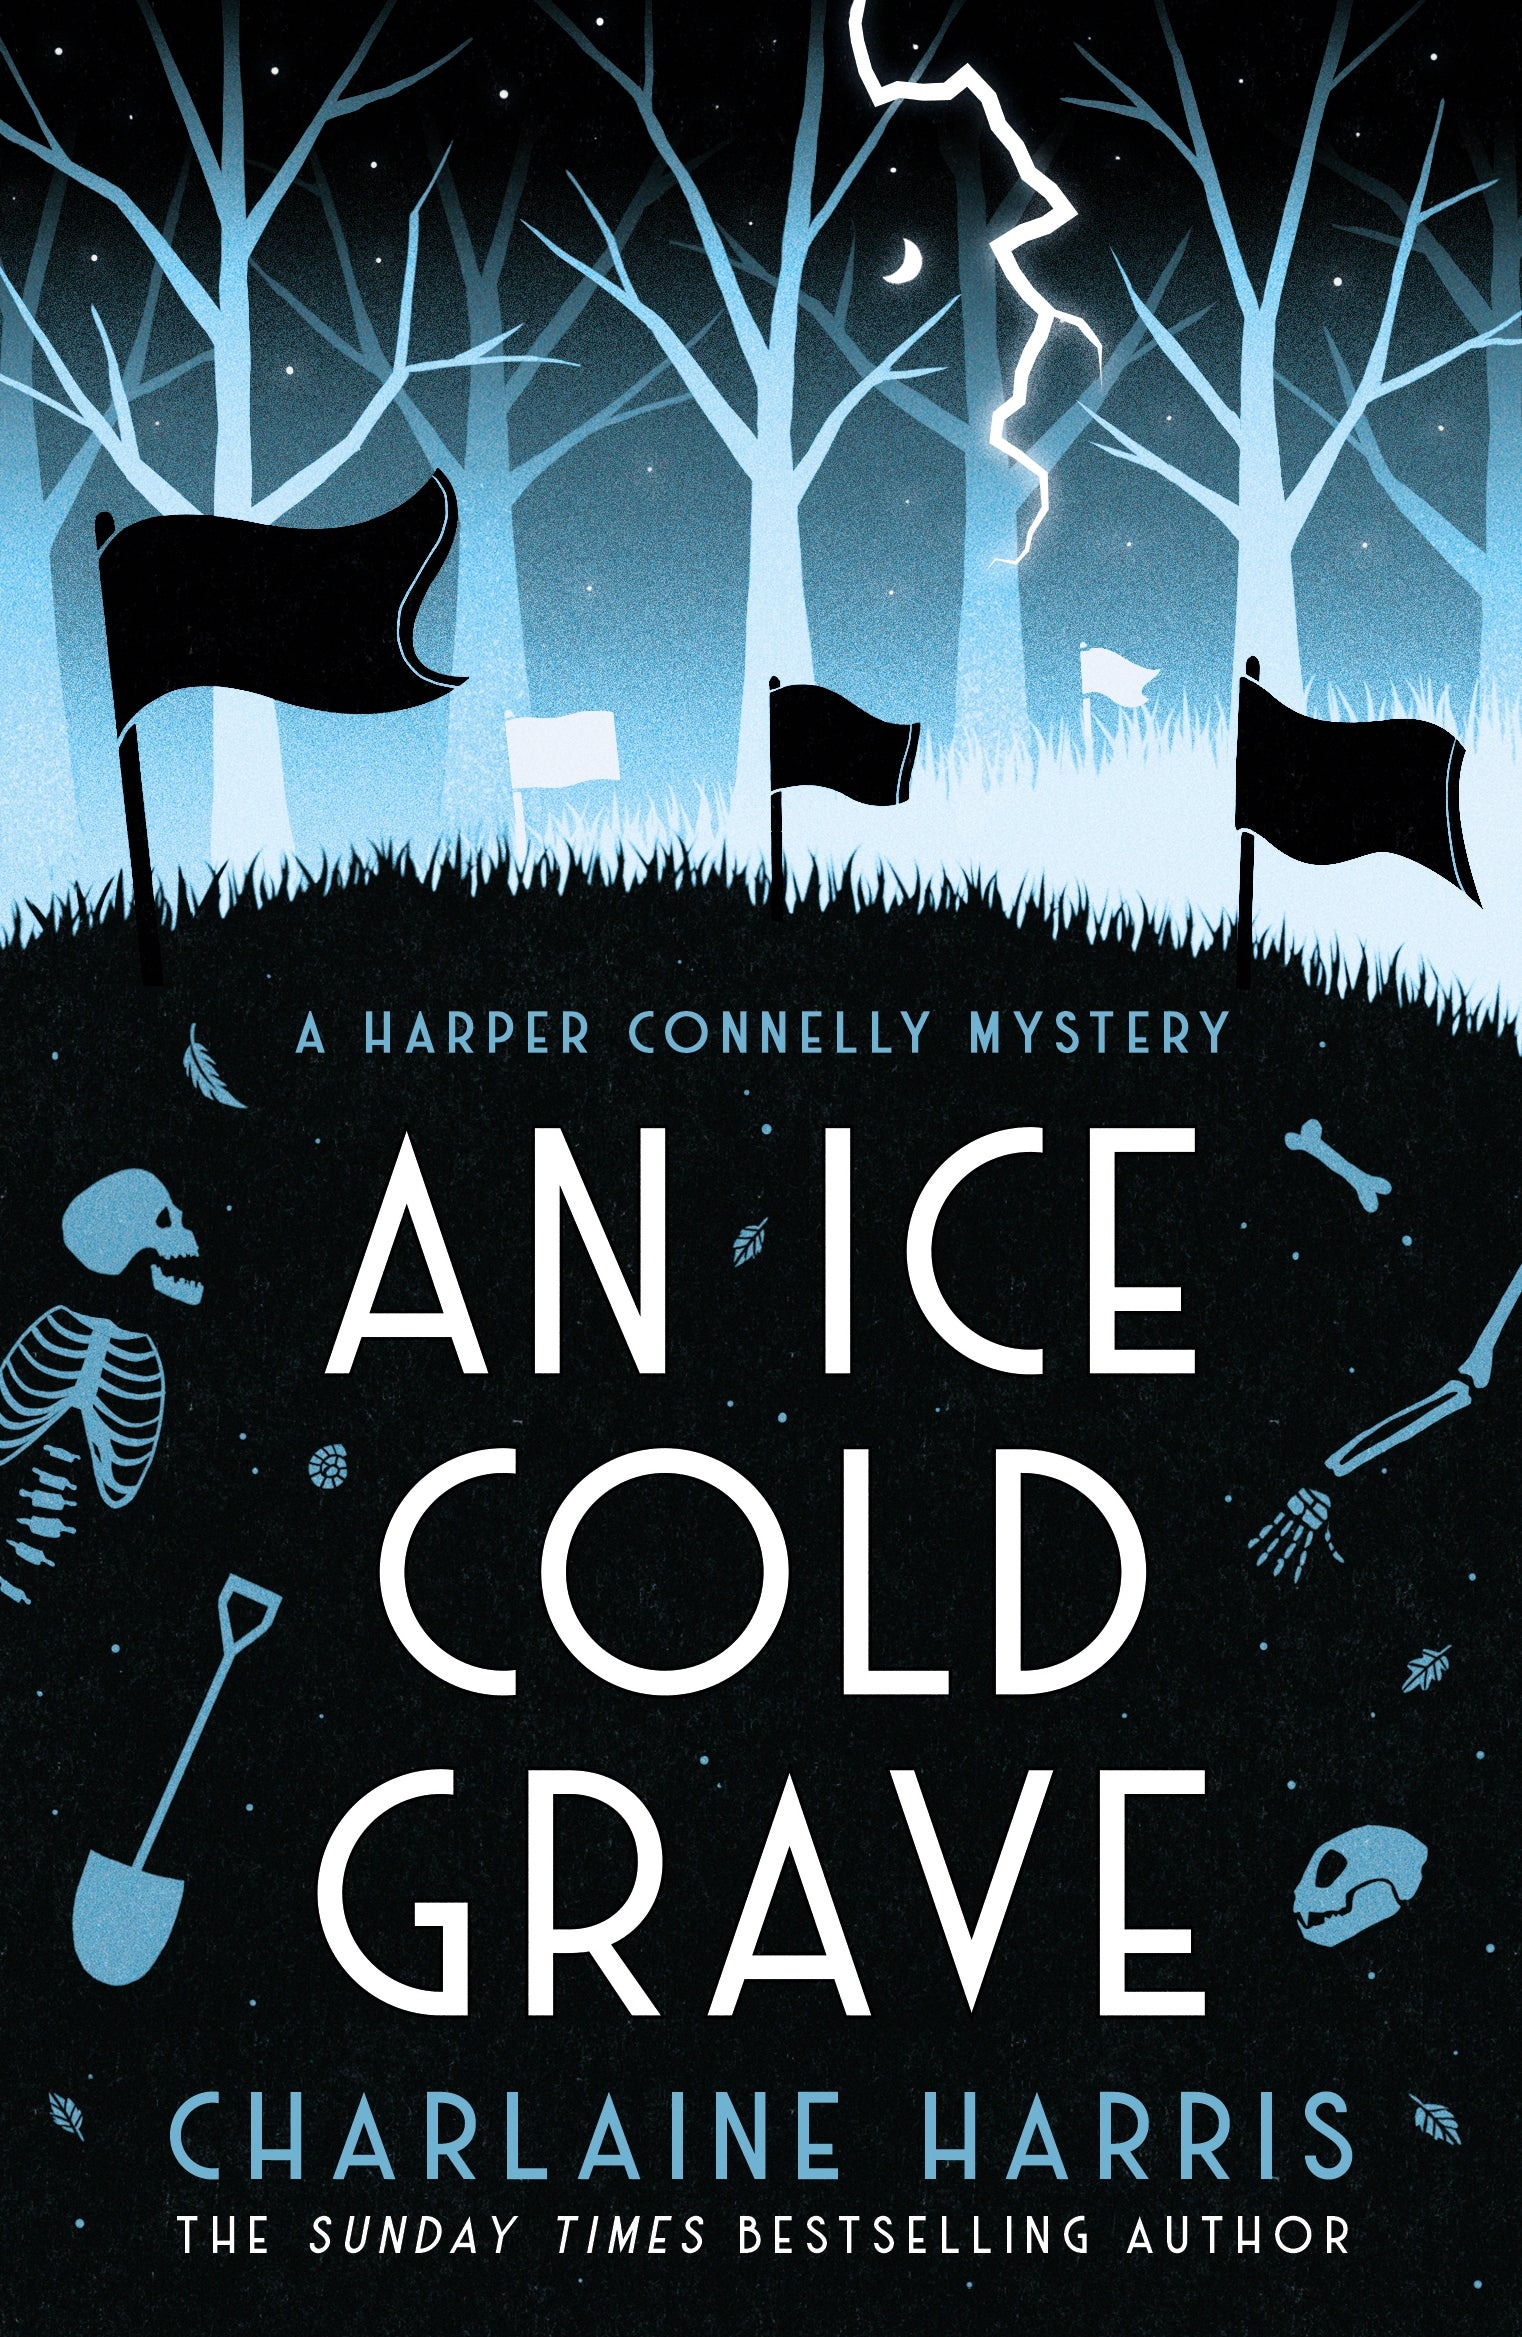 An Ice Cold Grave by Charlaine Harris